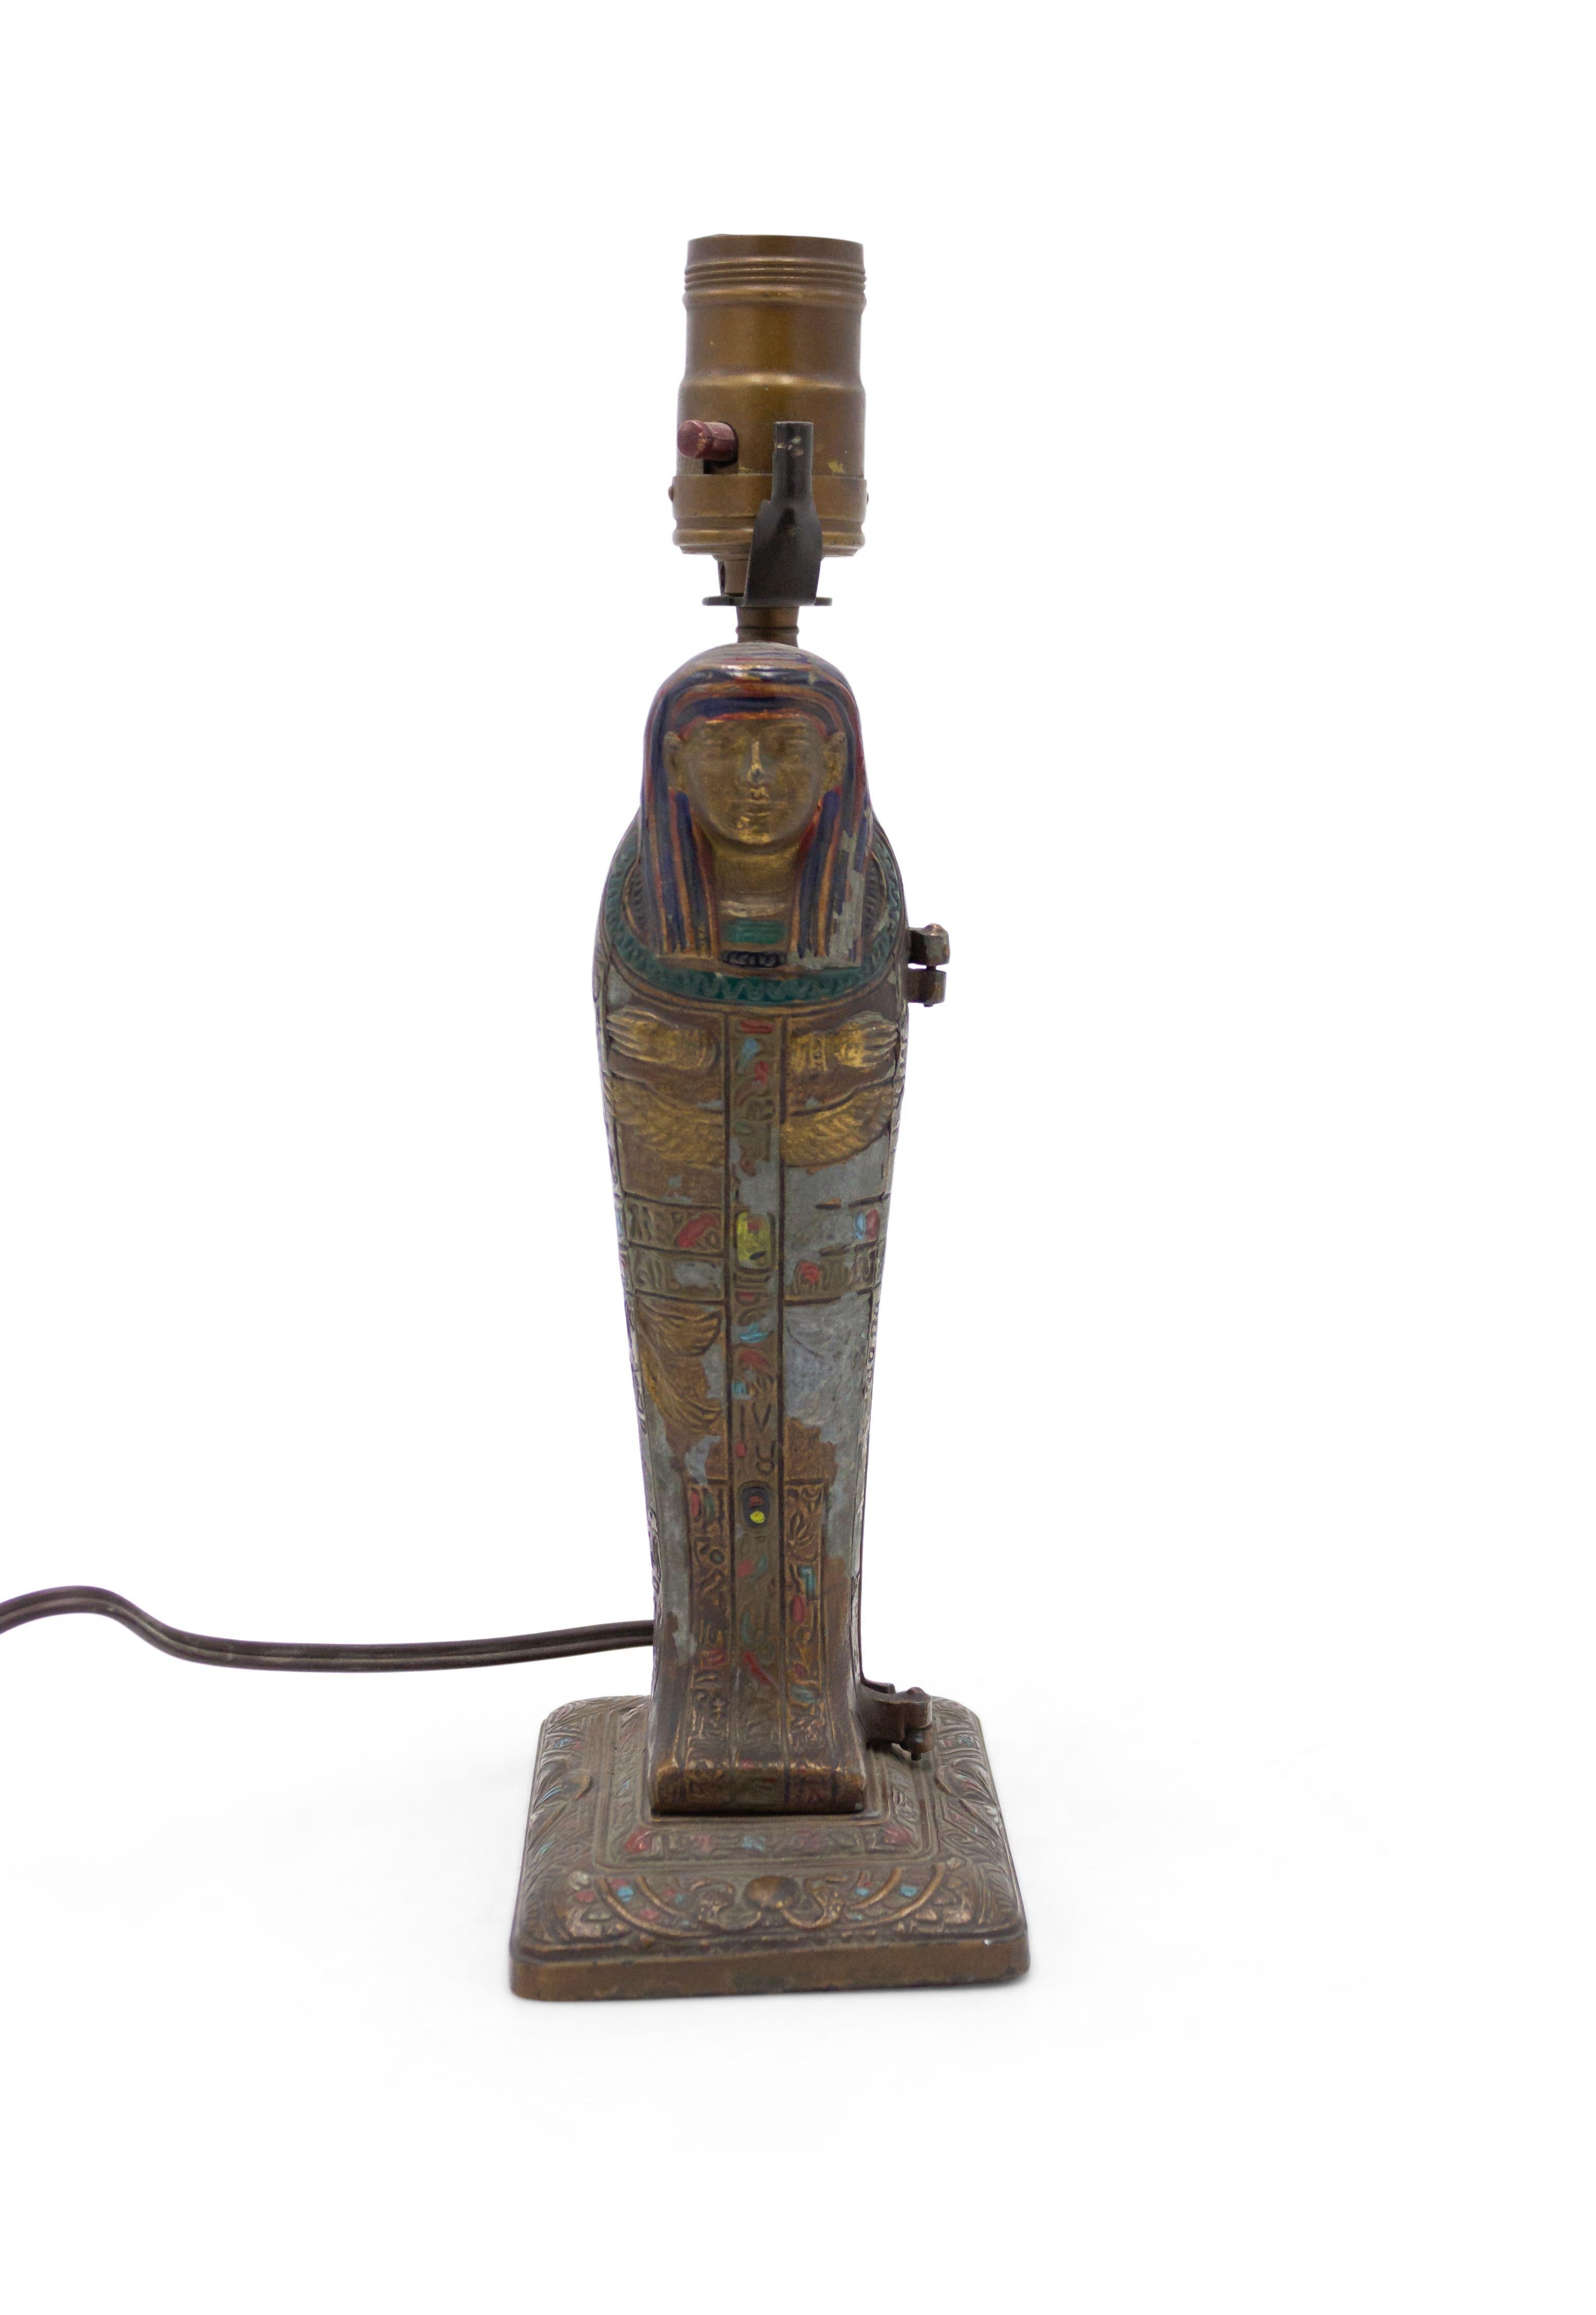 Austrian Egyptian revival style metamorphic cold-painted bronze sarcophagus shaped table lamp in the style of Franz Bergman with a bronze doré female figure inside base. (Attributed to LOUIS V. ARONSON circa 1923).